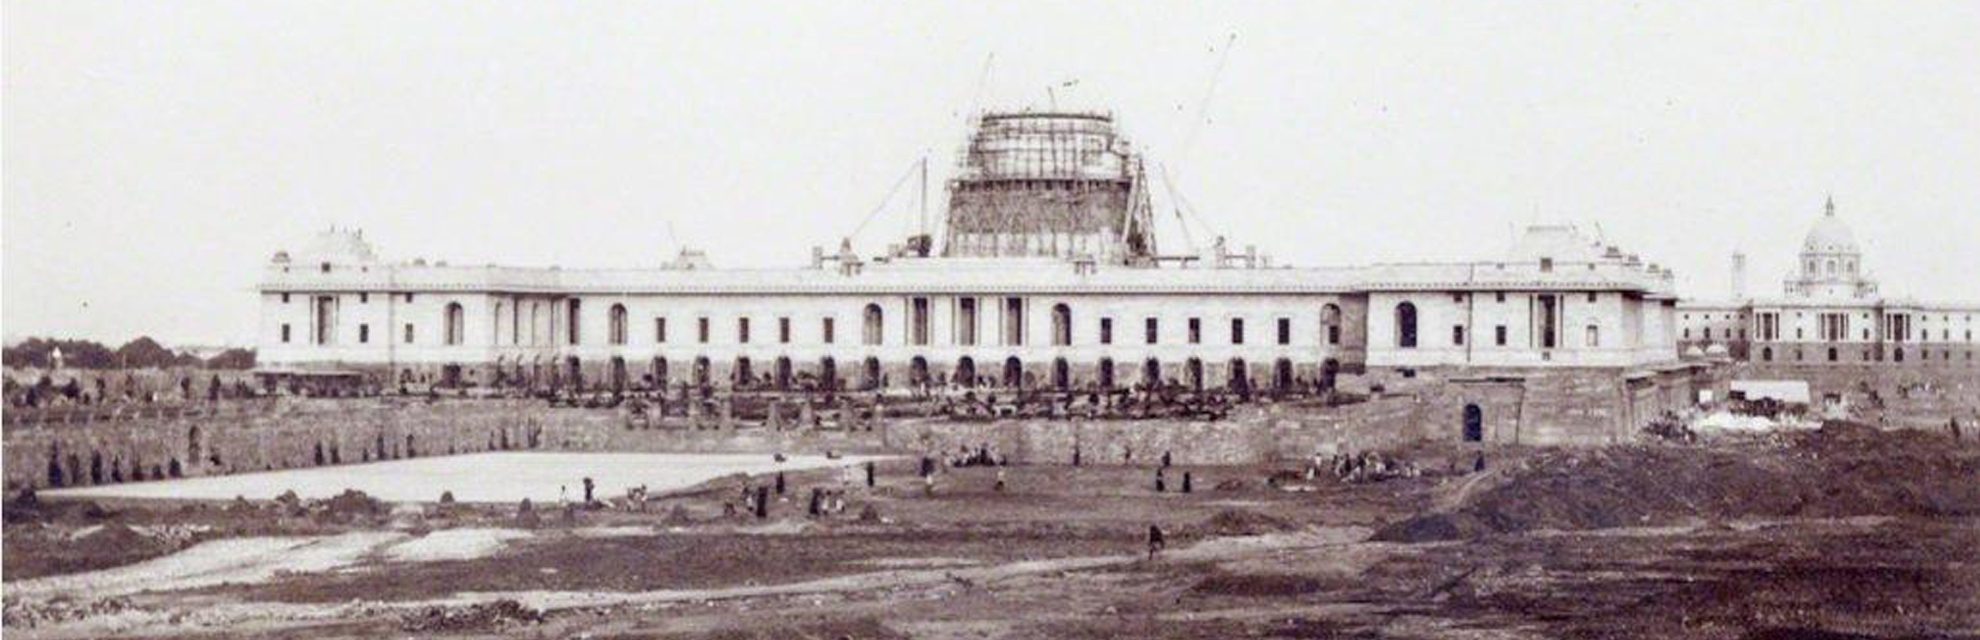 The Twitter handle of Indian History Pics shared a rare photo of Rashtrapati Bhavan under construction from the 1920s. The Presidential house, which has 350 room, is the second largest in the world after the Quirinal Palace, Rome, Italy.